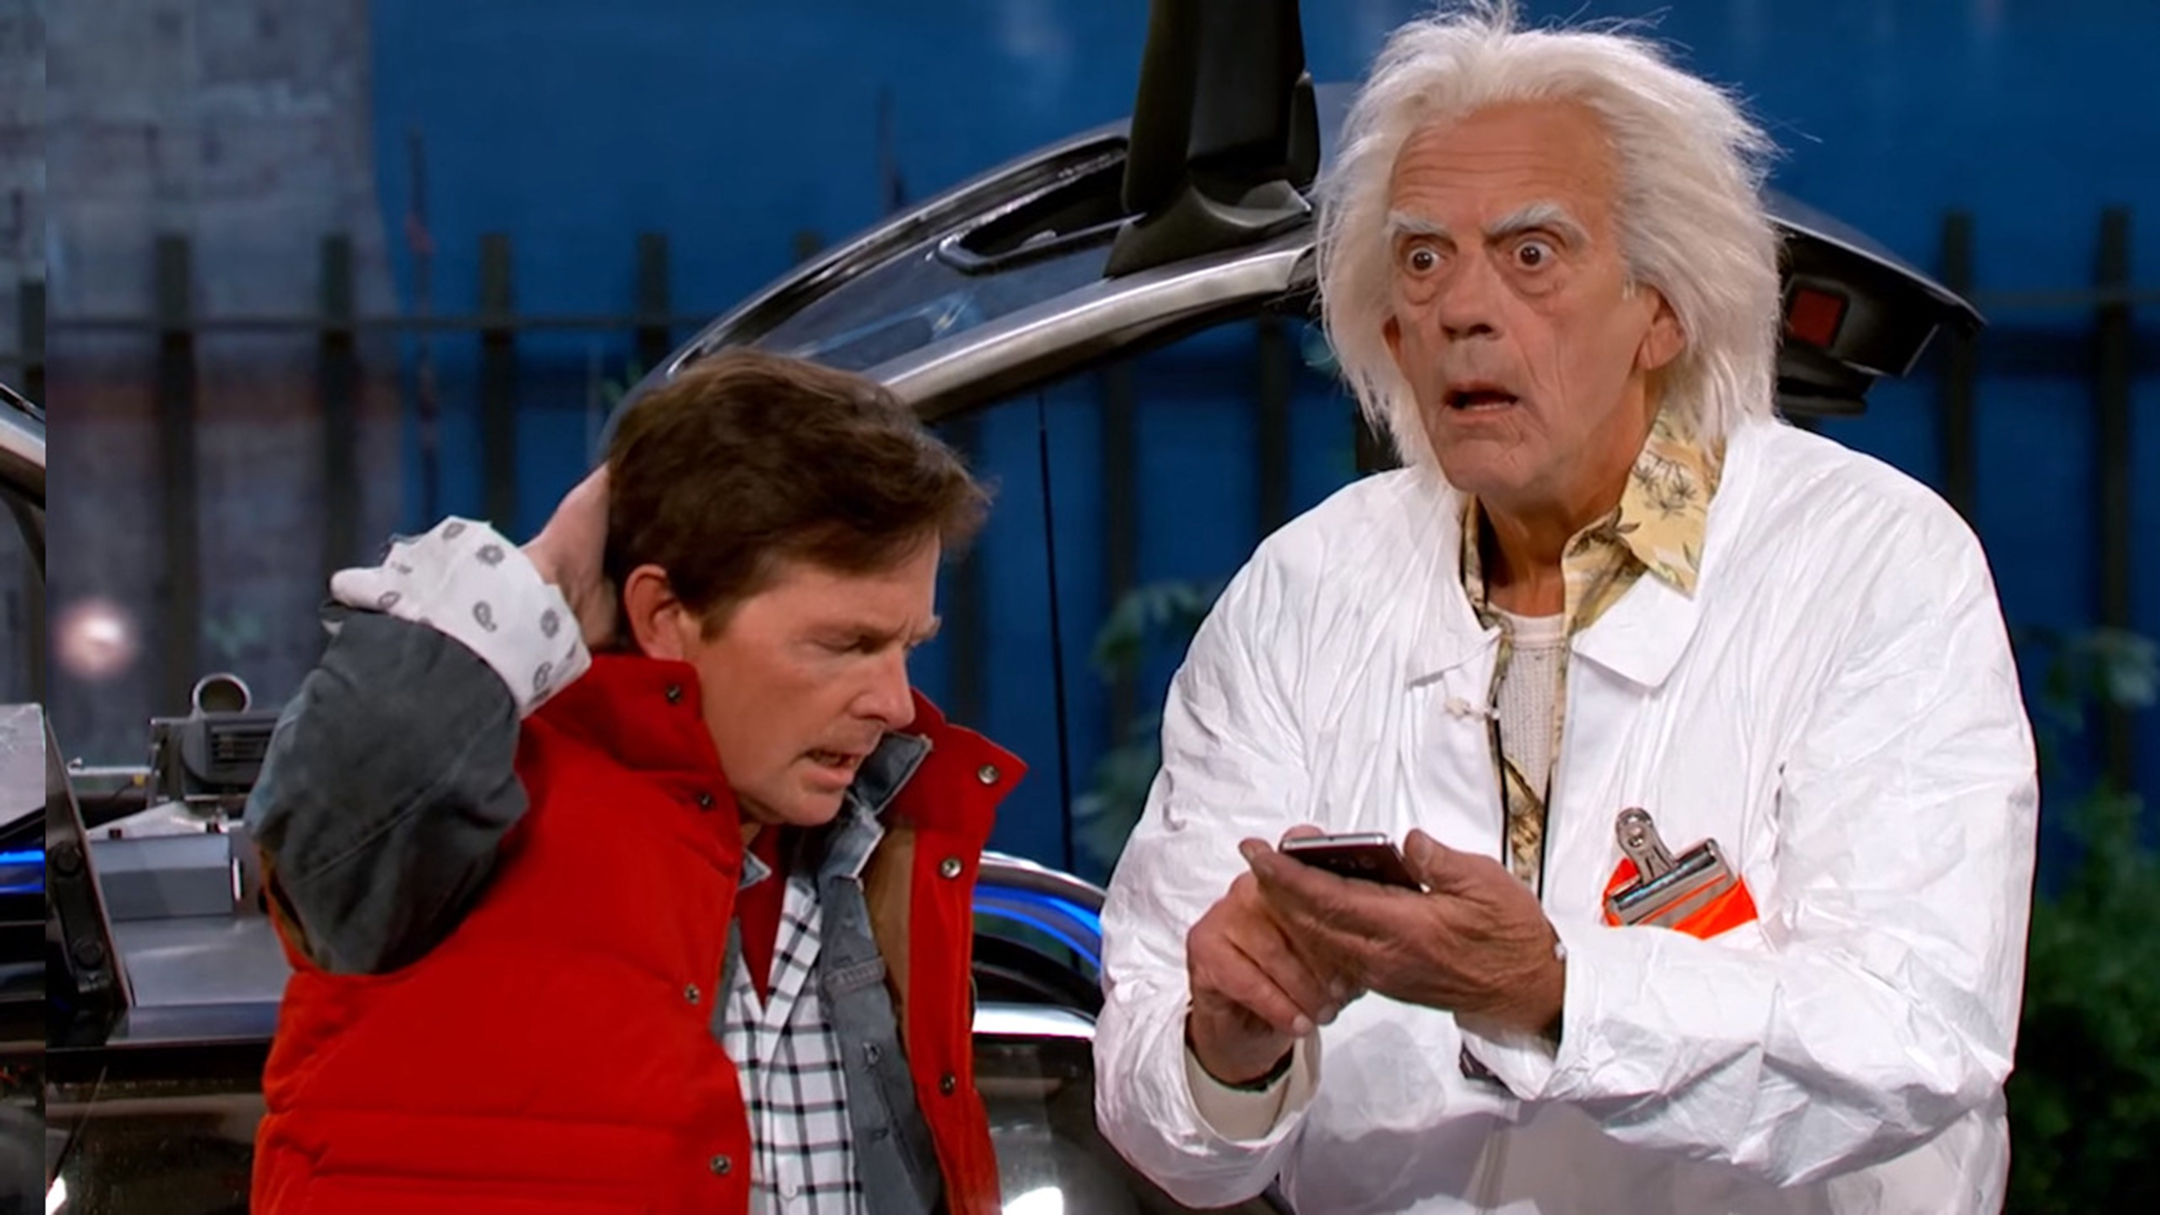 Michael J. Fox and Christopher Lloyd in costume as their characters from Back to the Future